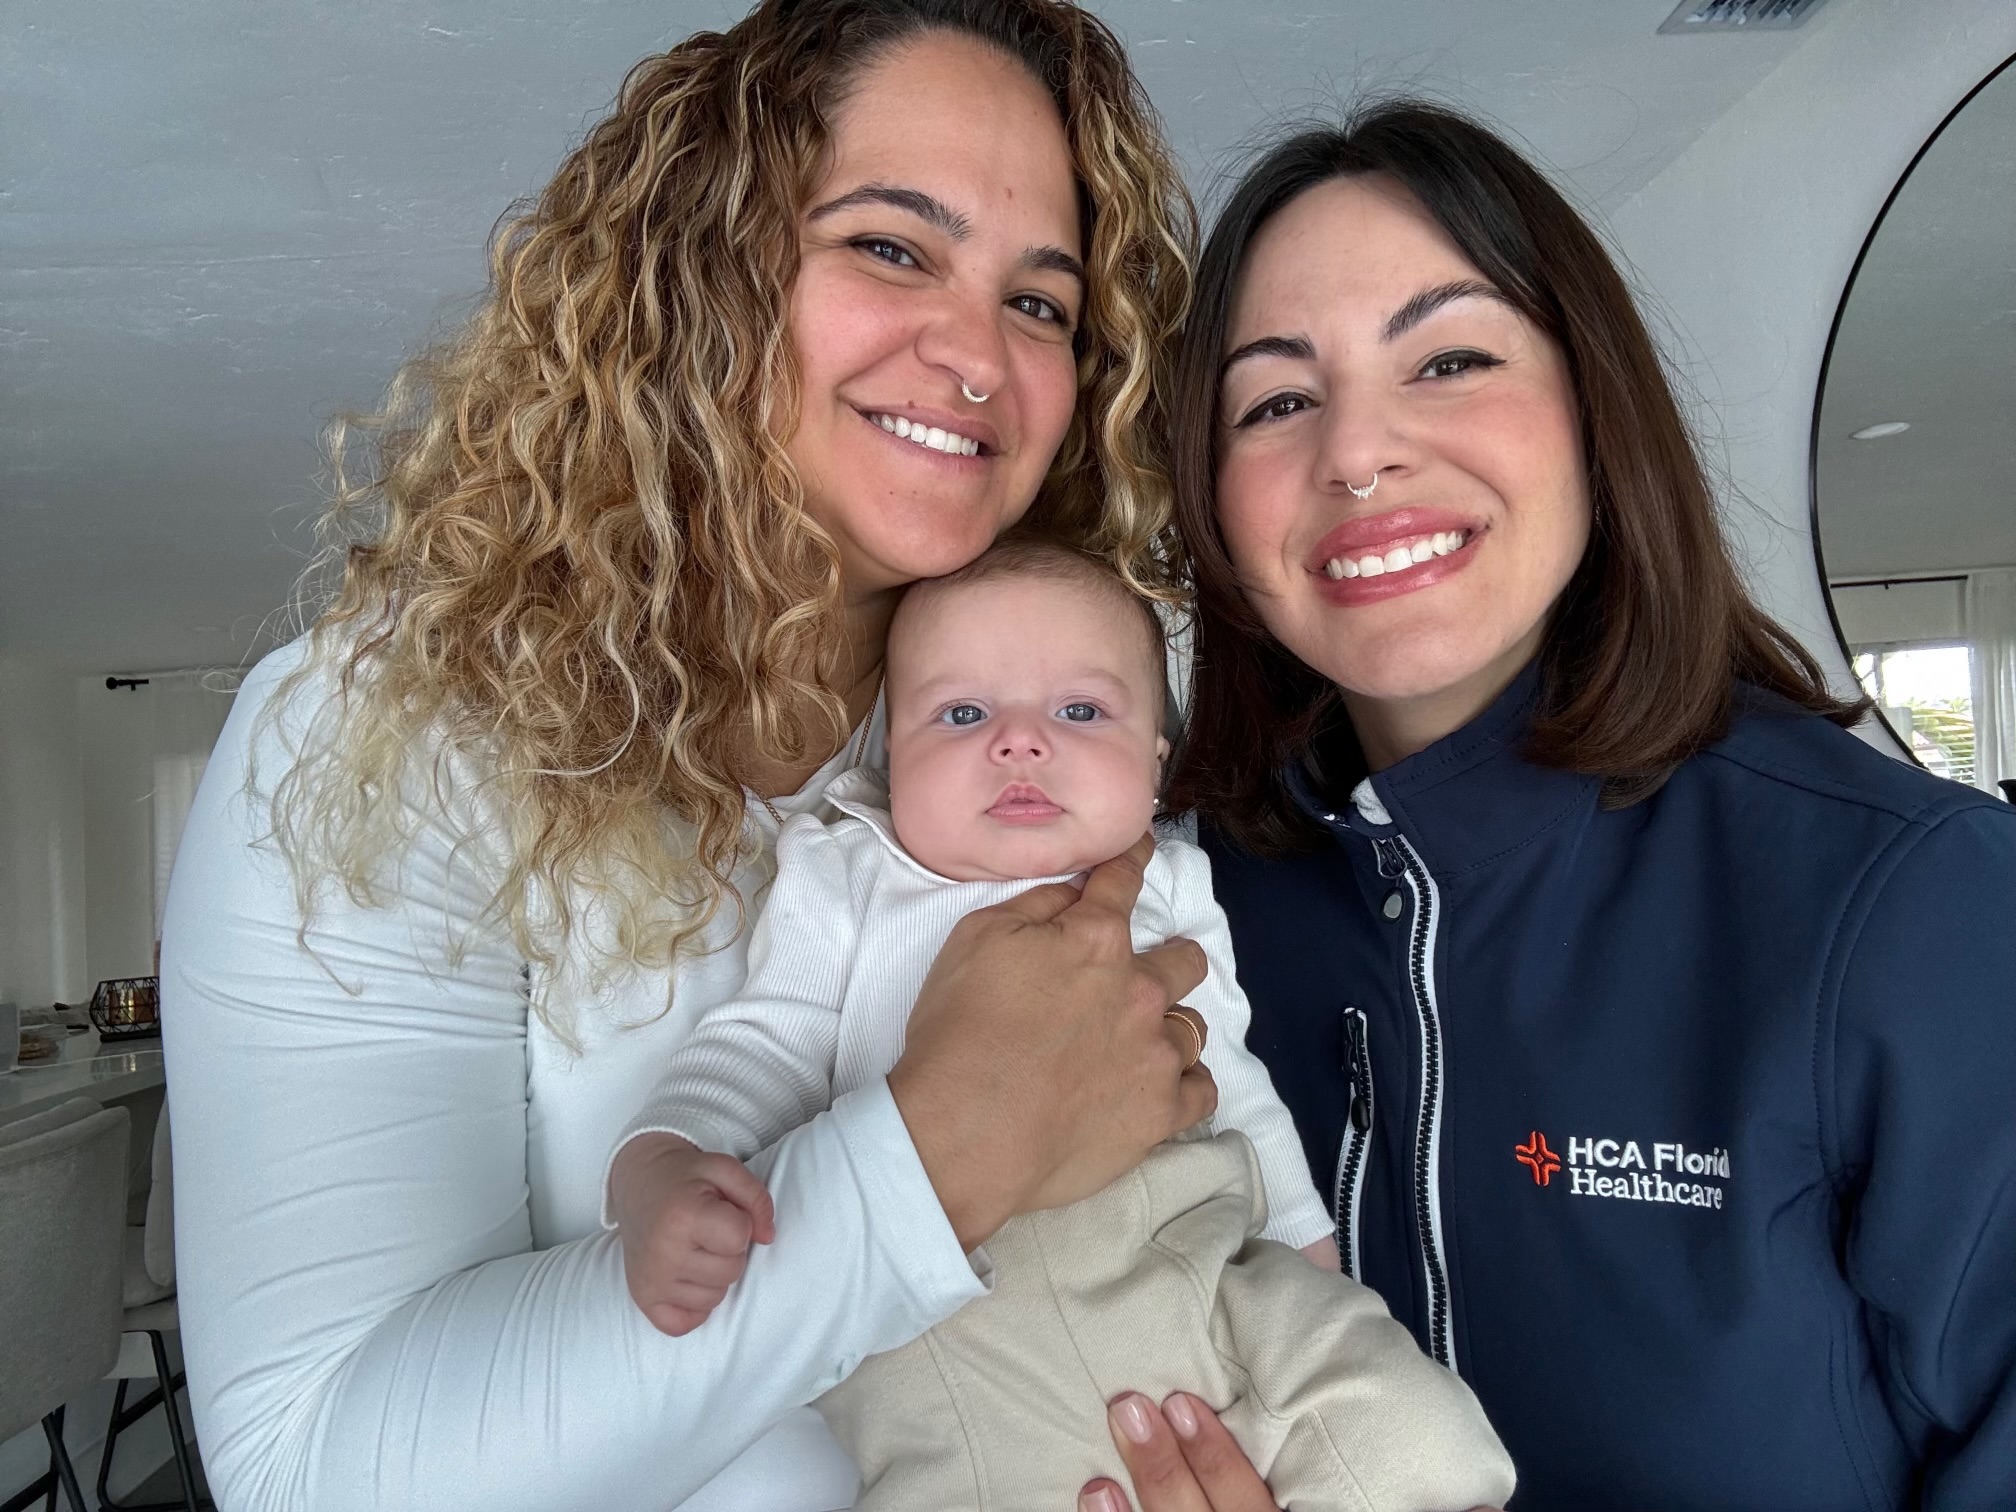 Yoiris Varela-Mora, her partner Liz, and their baby girl Olive pose for a picture.